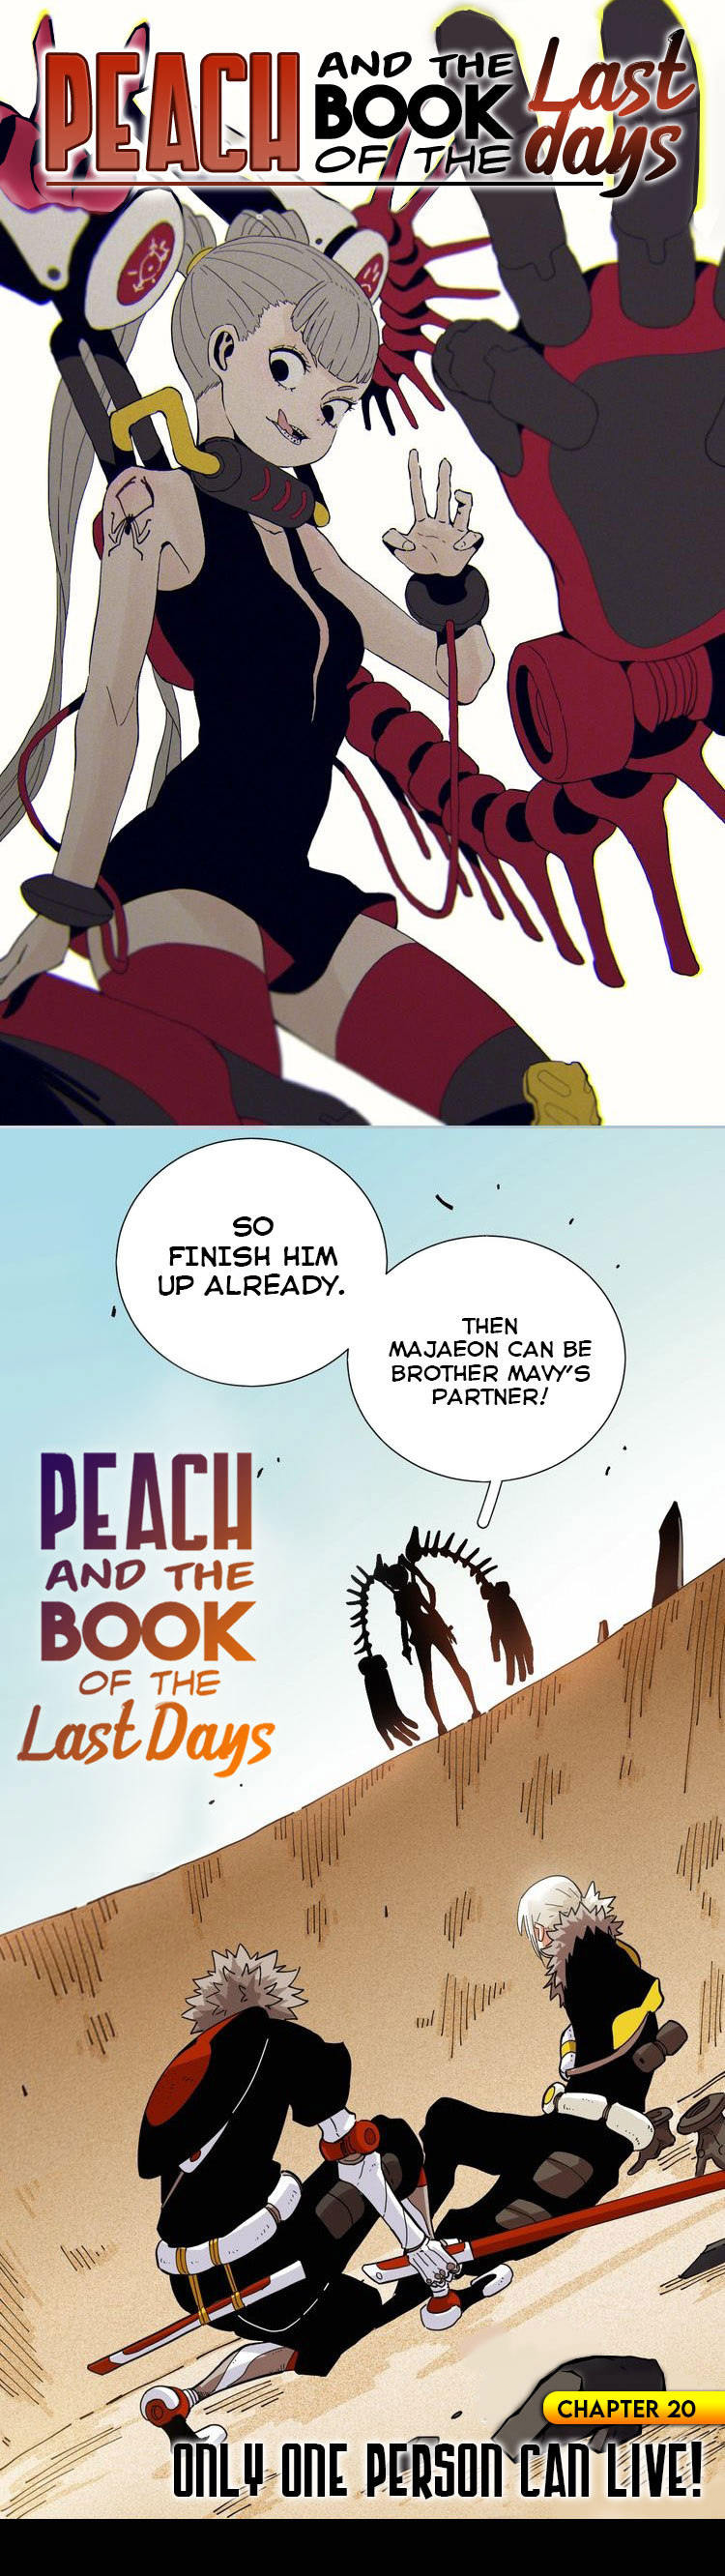 Peach and the Book of the Last Days Ch. 20 Only One Person Can Live!